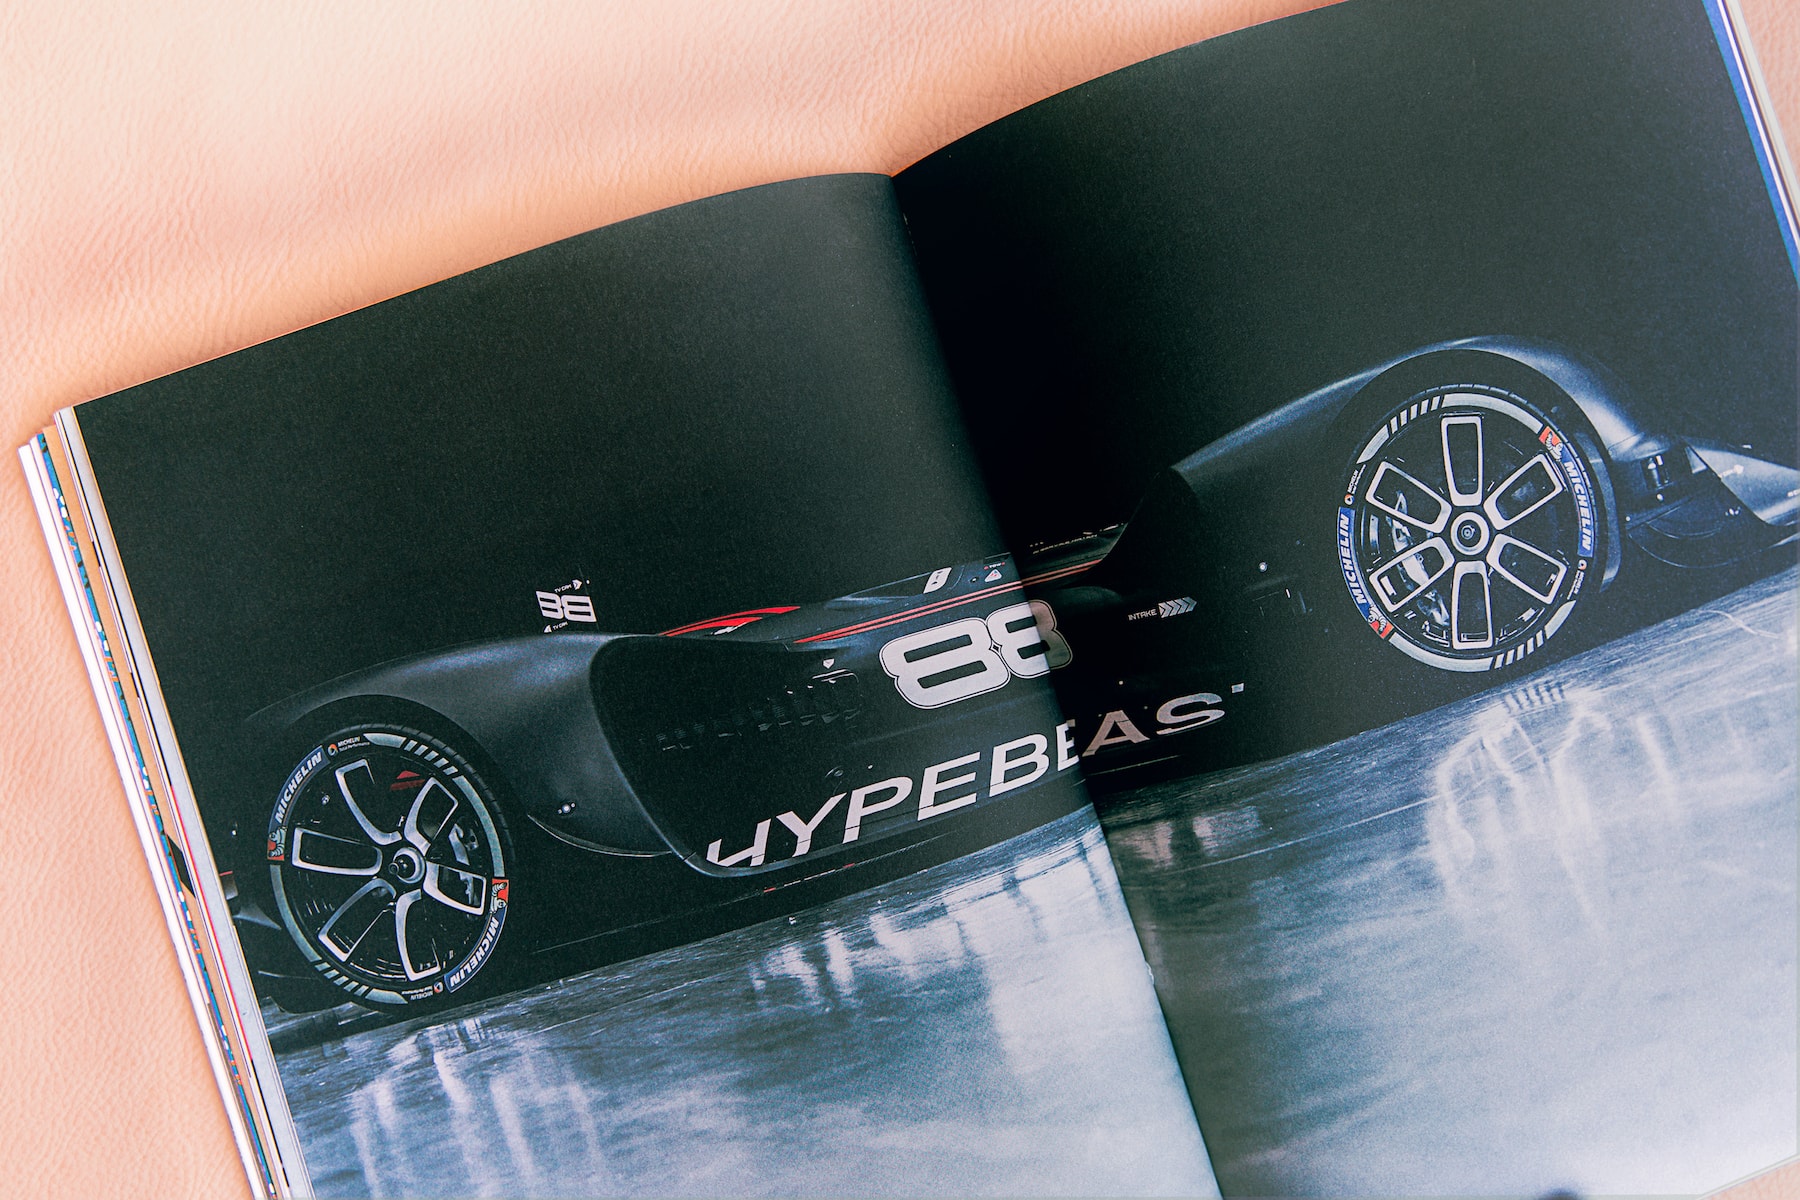 HYPEBEAST Magazine Issue 19: The Temporal Issue